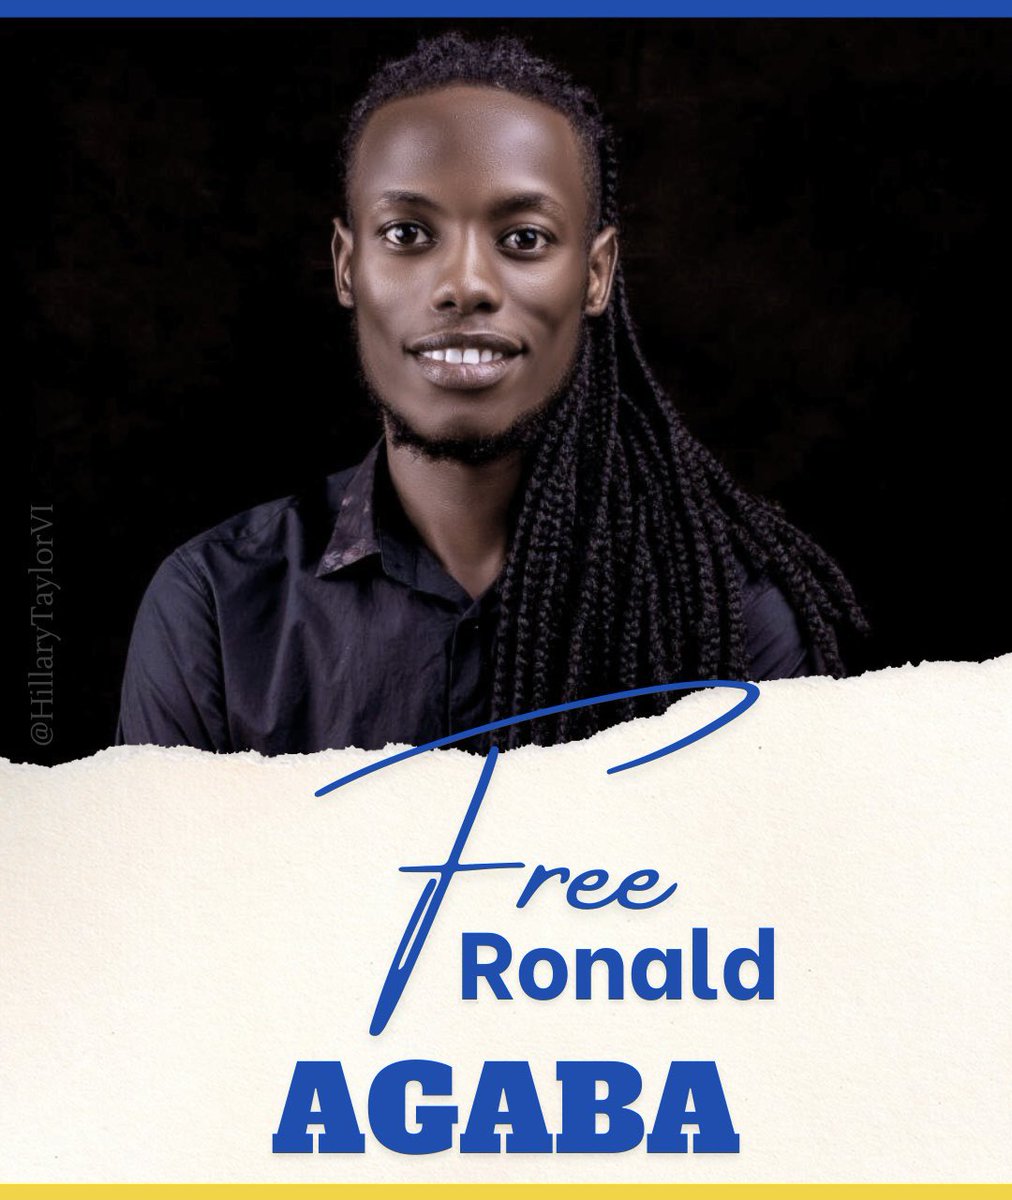 Uganda Human Rights activist Ronnie Agaba was illegally arrested & sent to prison. Ronnie’s crime was to peacefully protest against corruption at the Parliament of Uganda #FreeRonnieAgaba